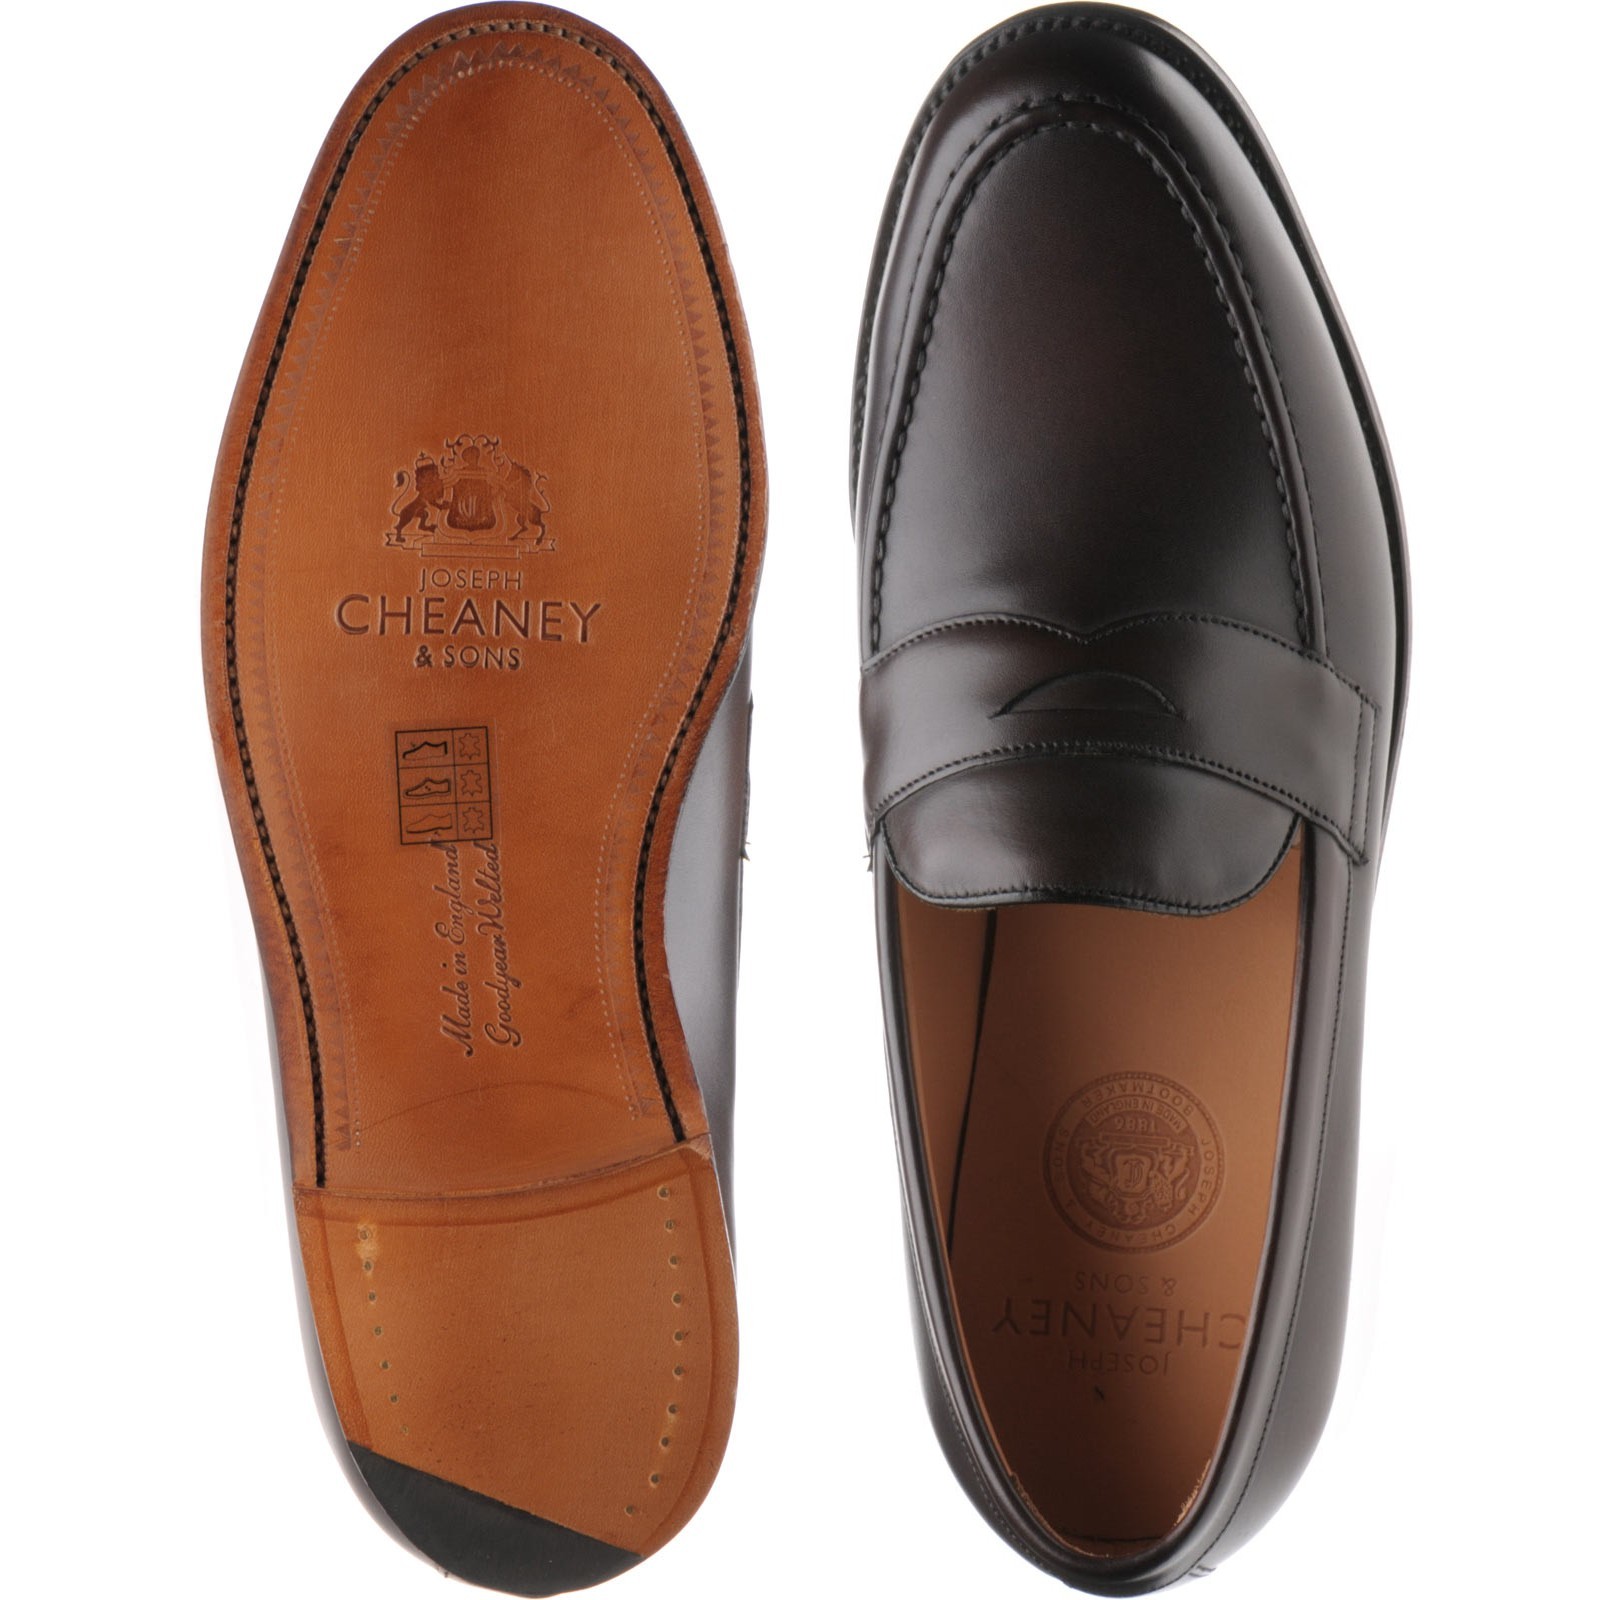 Cheaney shoes | Cheaney of England | Hudson in Mocha Calf at Herring Shoes